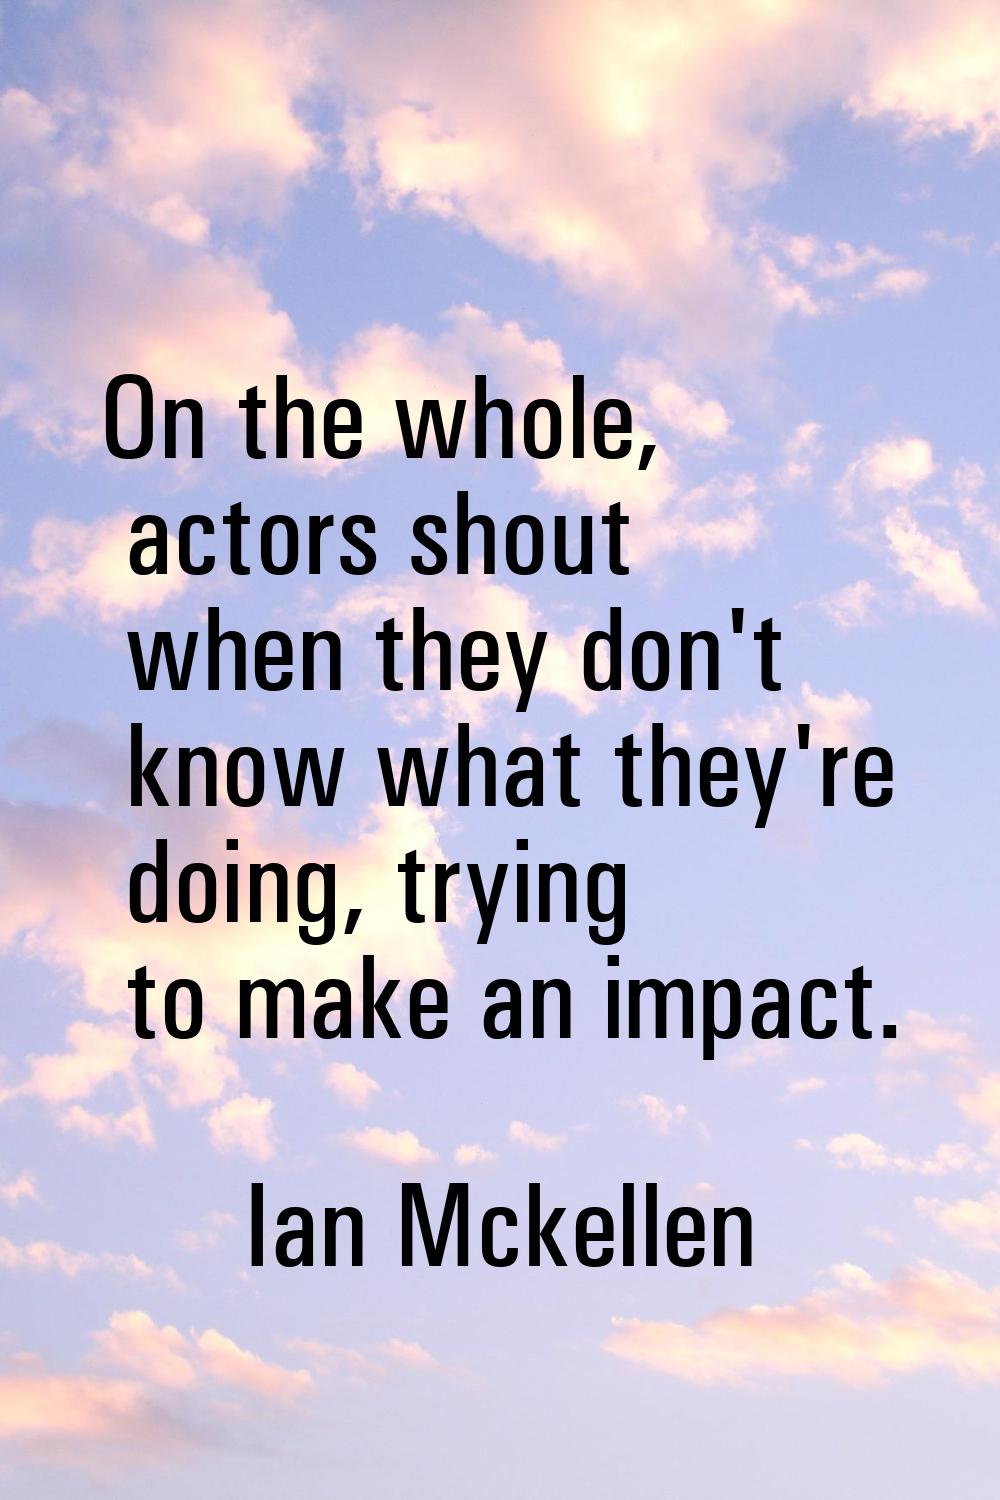 On the whole, actors shout when they don't know what they're doing, trying to make an impact.